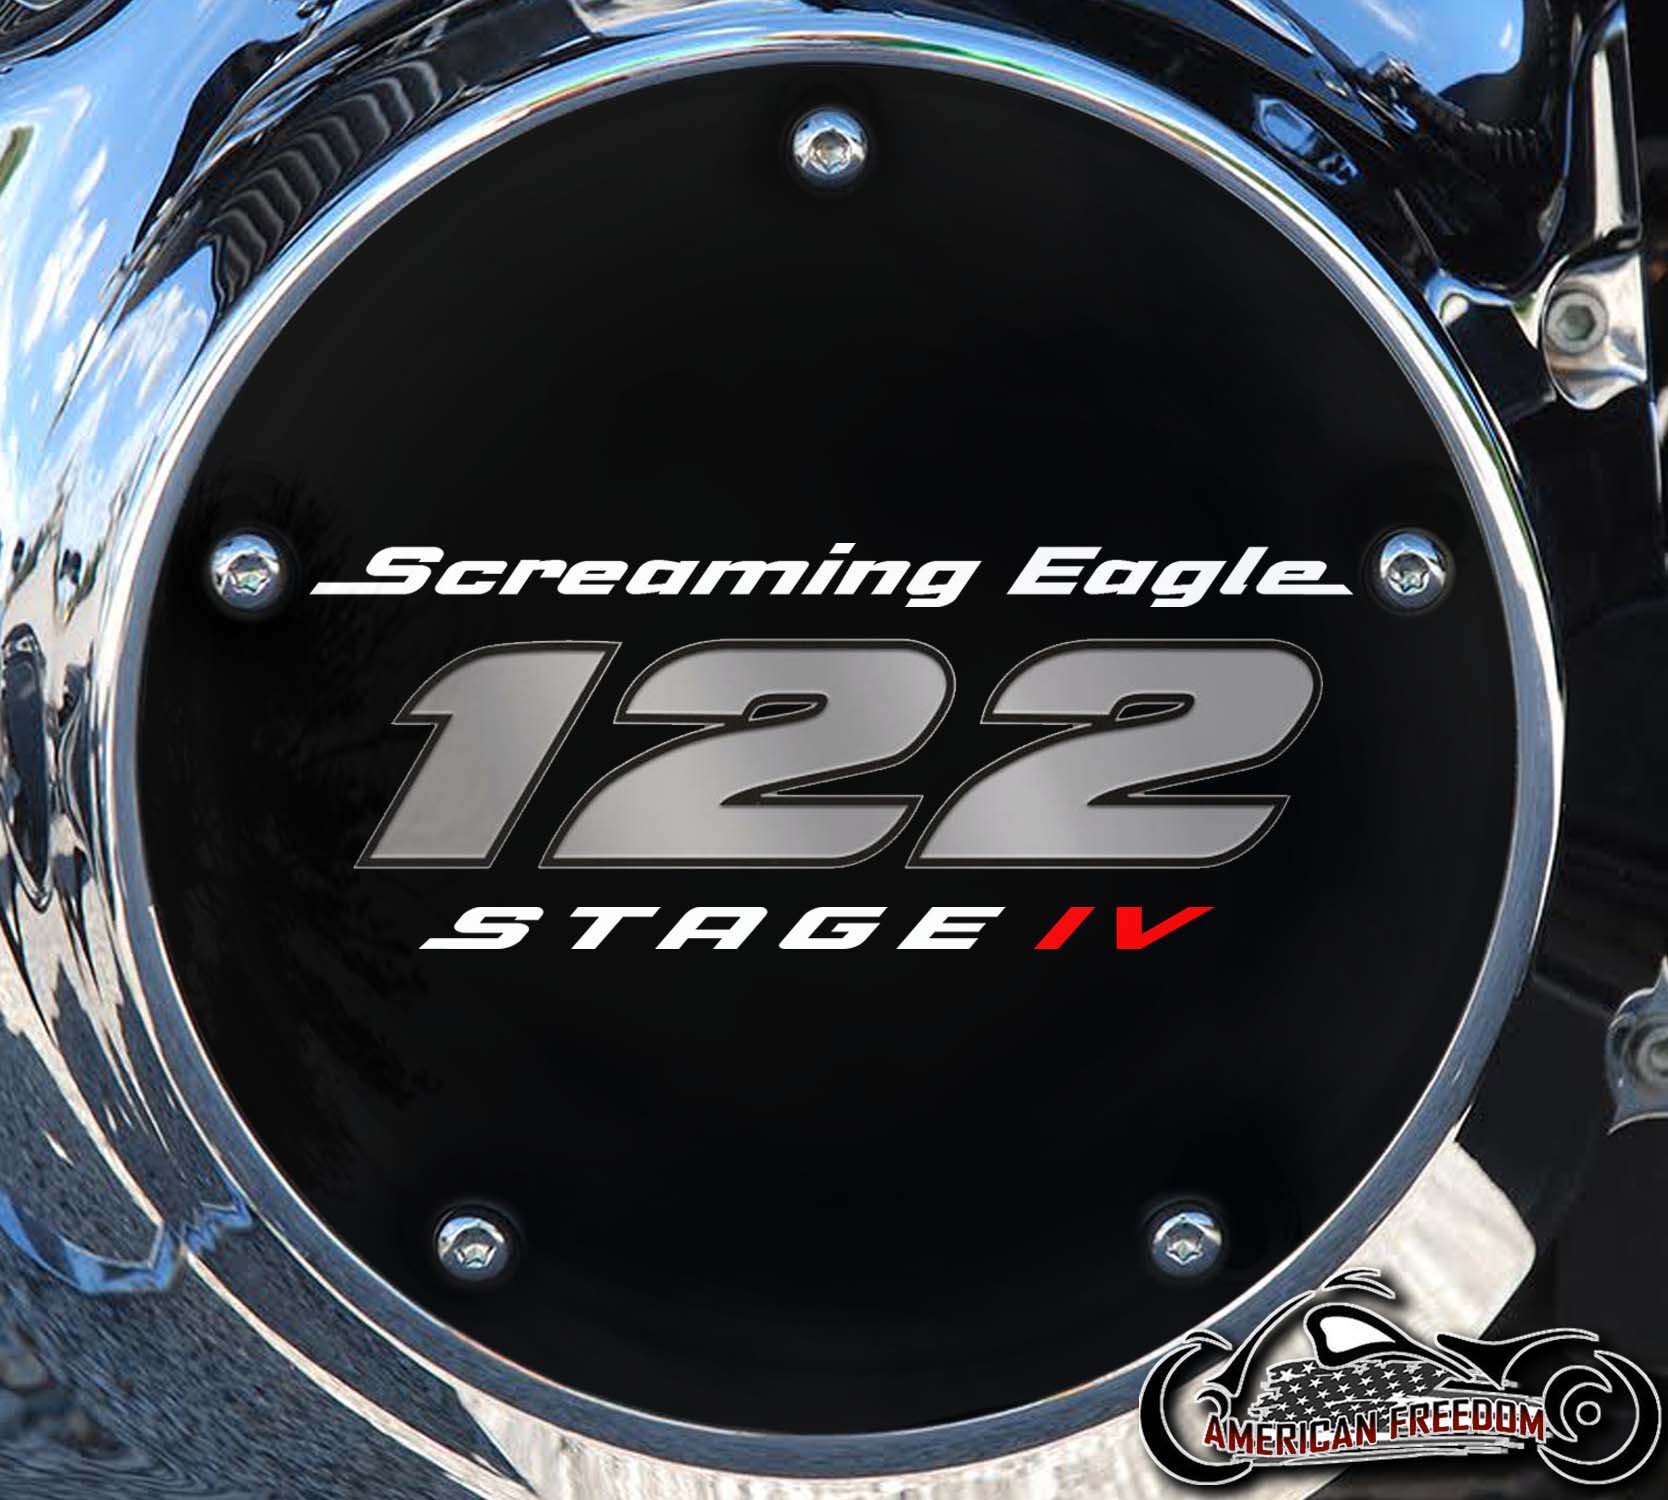 Screaming Eagle Stage IV 122 Derby Cover